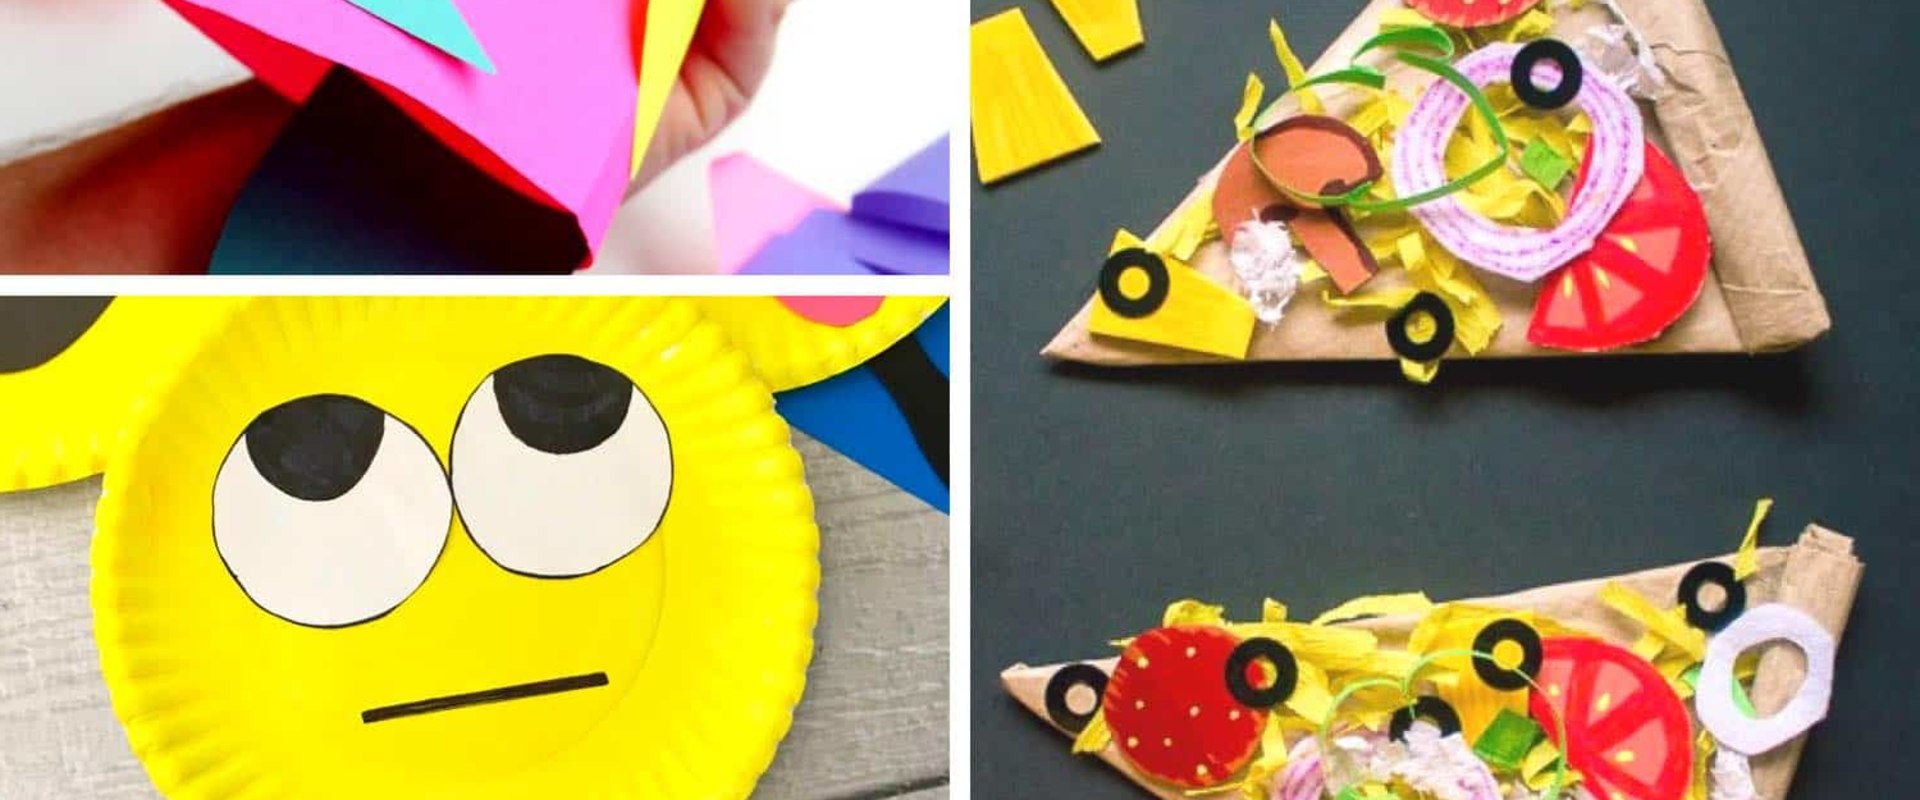 Craft Ideas for Kids: Creative Projects to Inspire